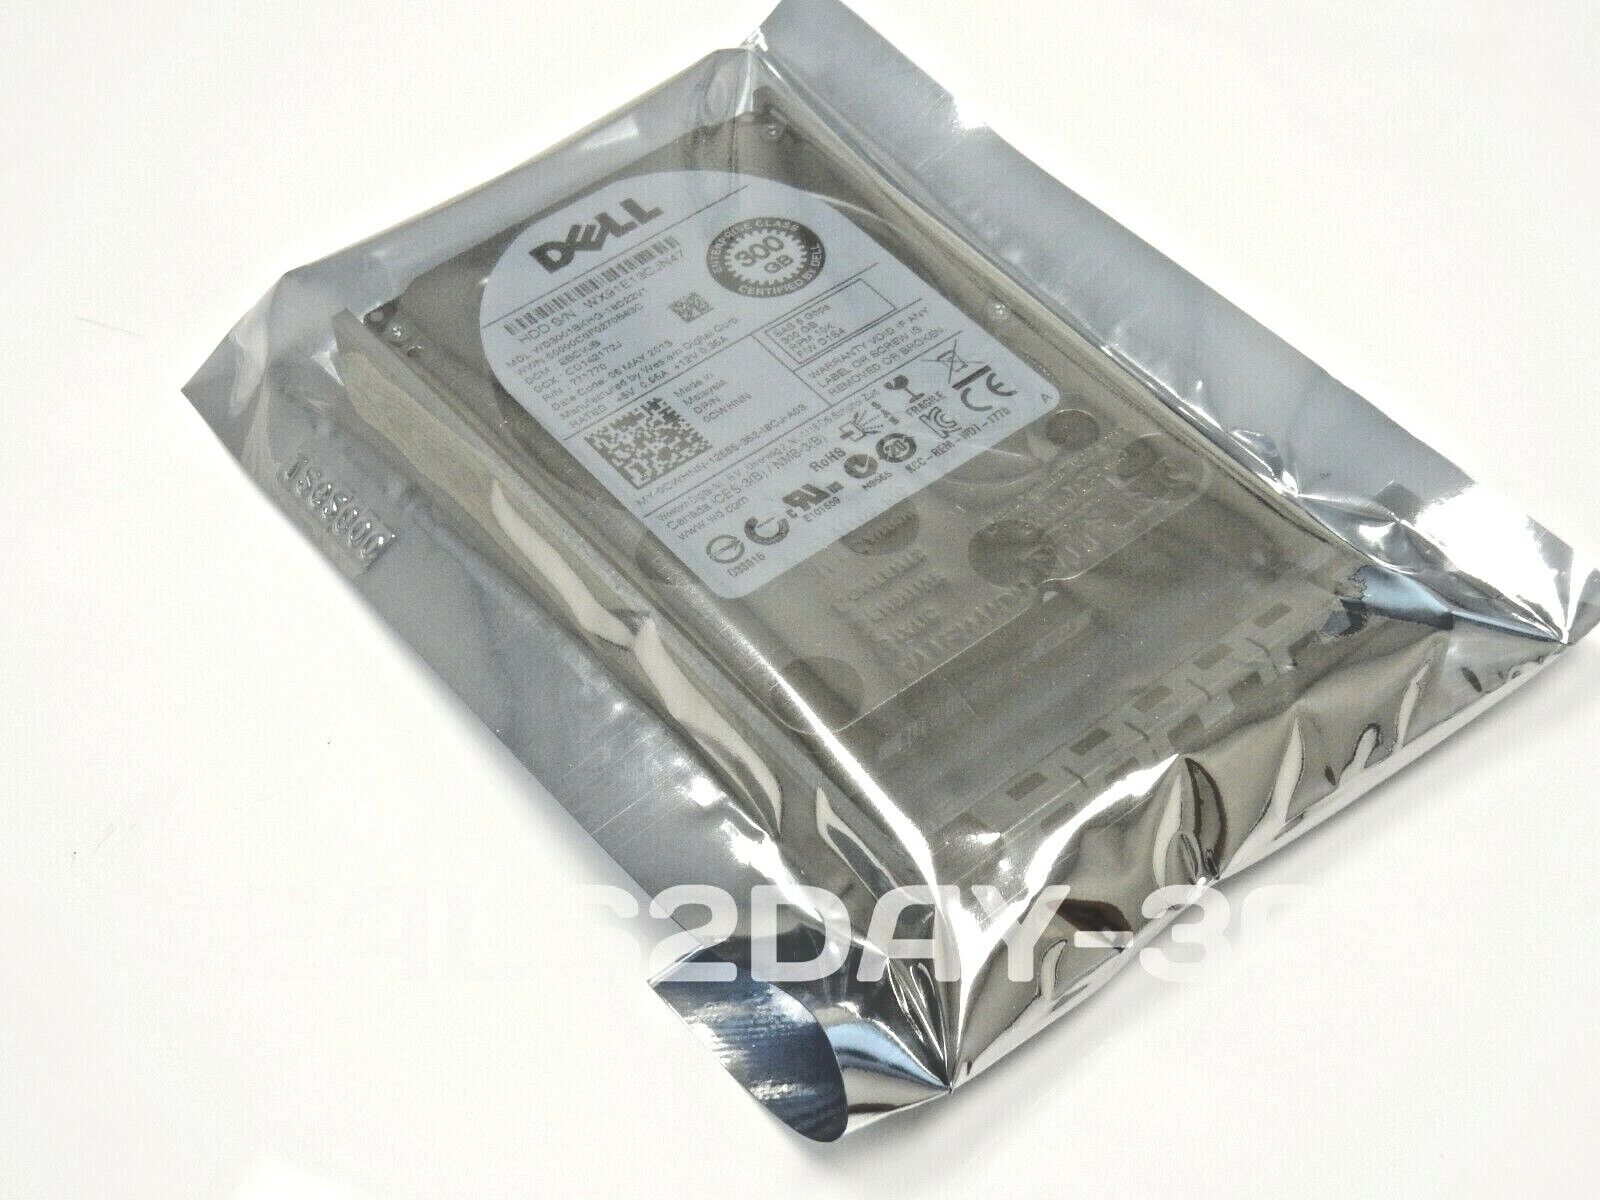 Dell CWHNN 0CWHNN 300GB 10K 2.5in SAS SERVER Drive W/ Caddy Tray NOT for laptops